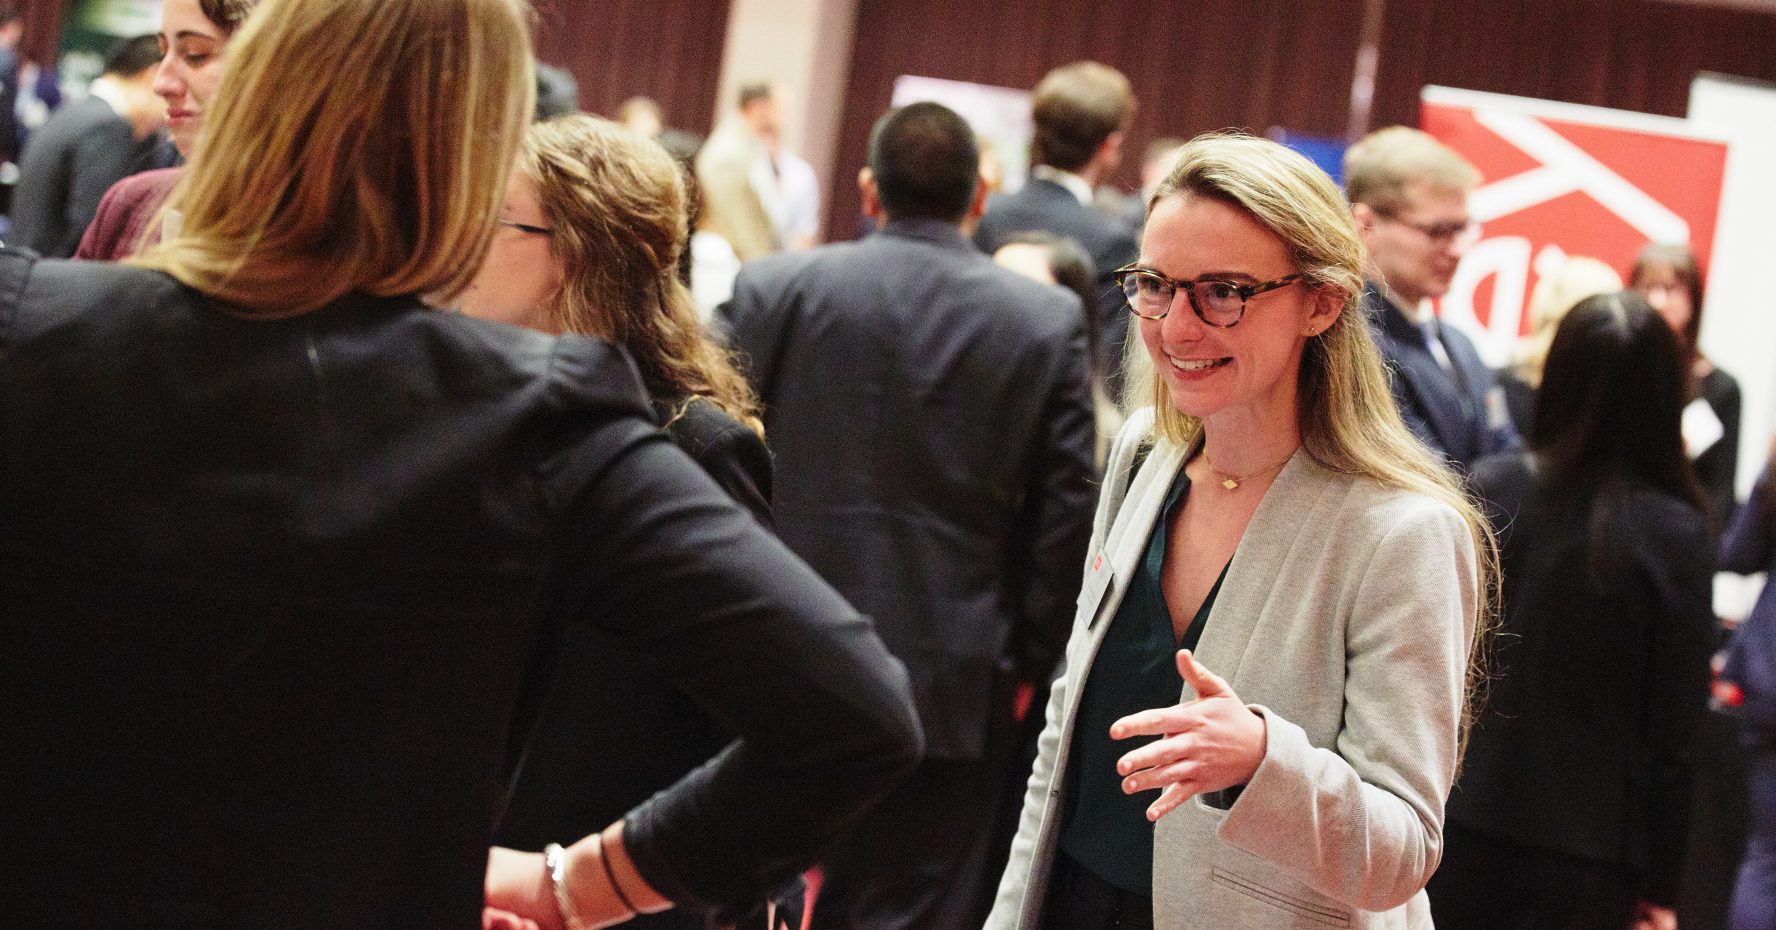 Students at a networking event